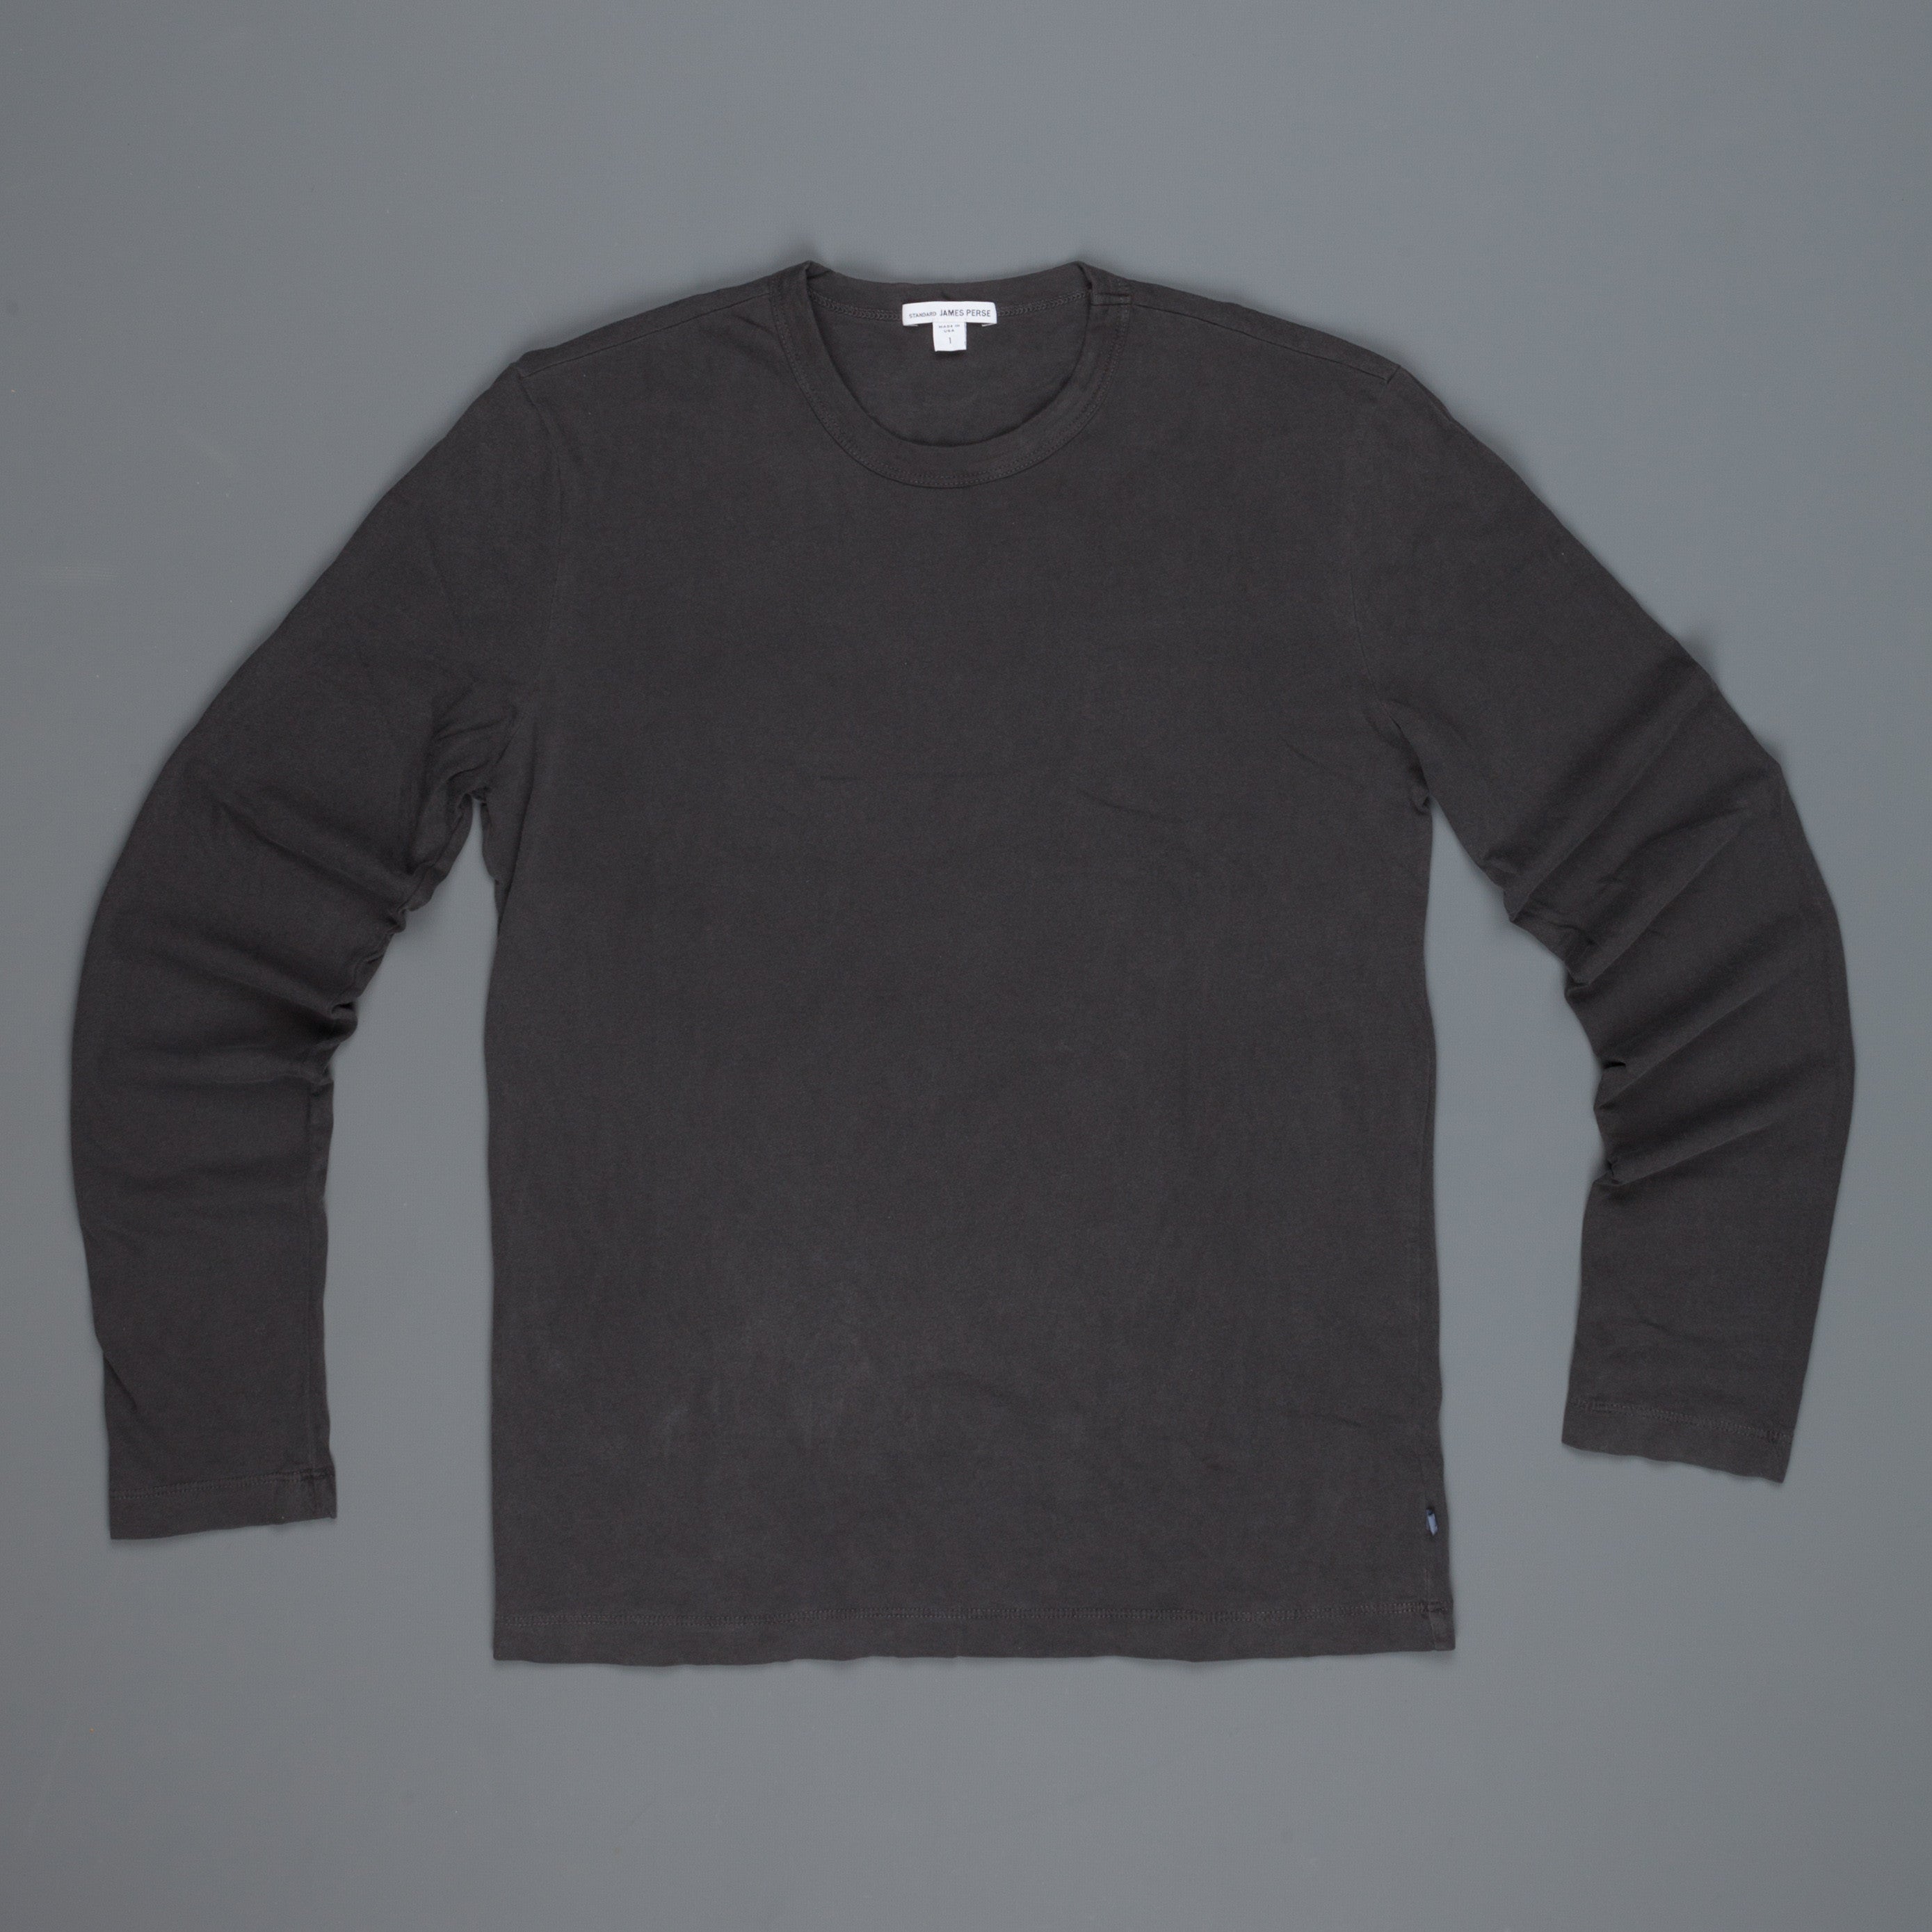 James Perse long sleeve crew neck Carbon